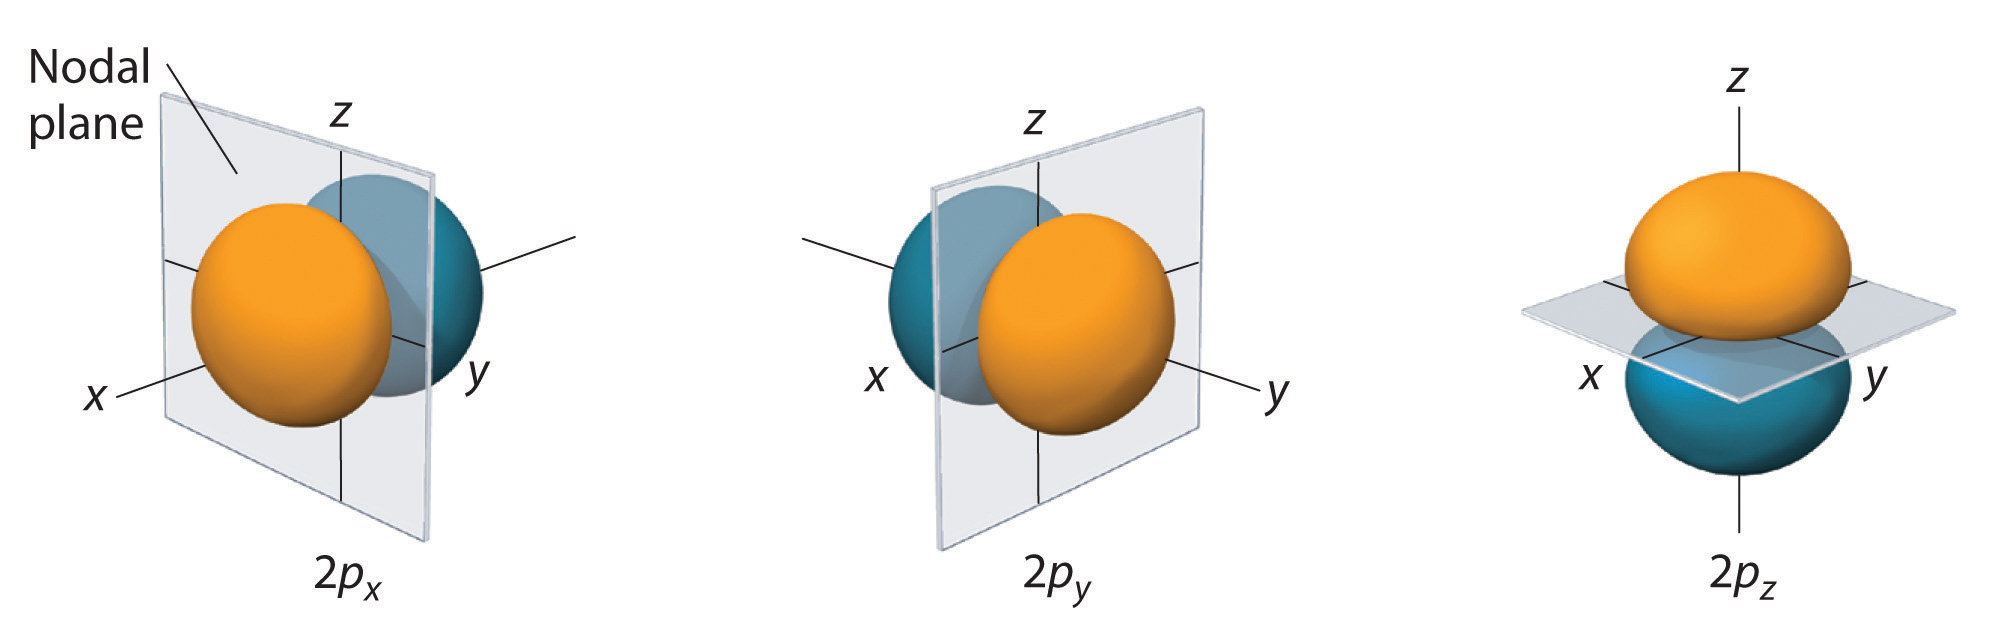 The 2p orbitals can be broken down into 2px, 2py, and 2pz.